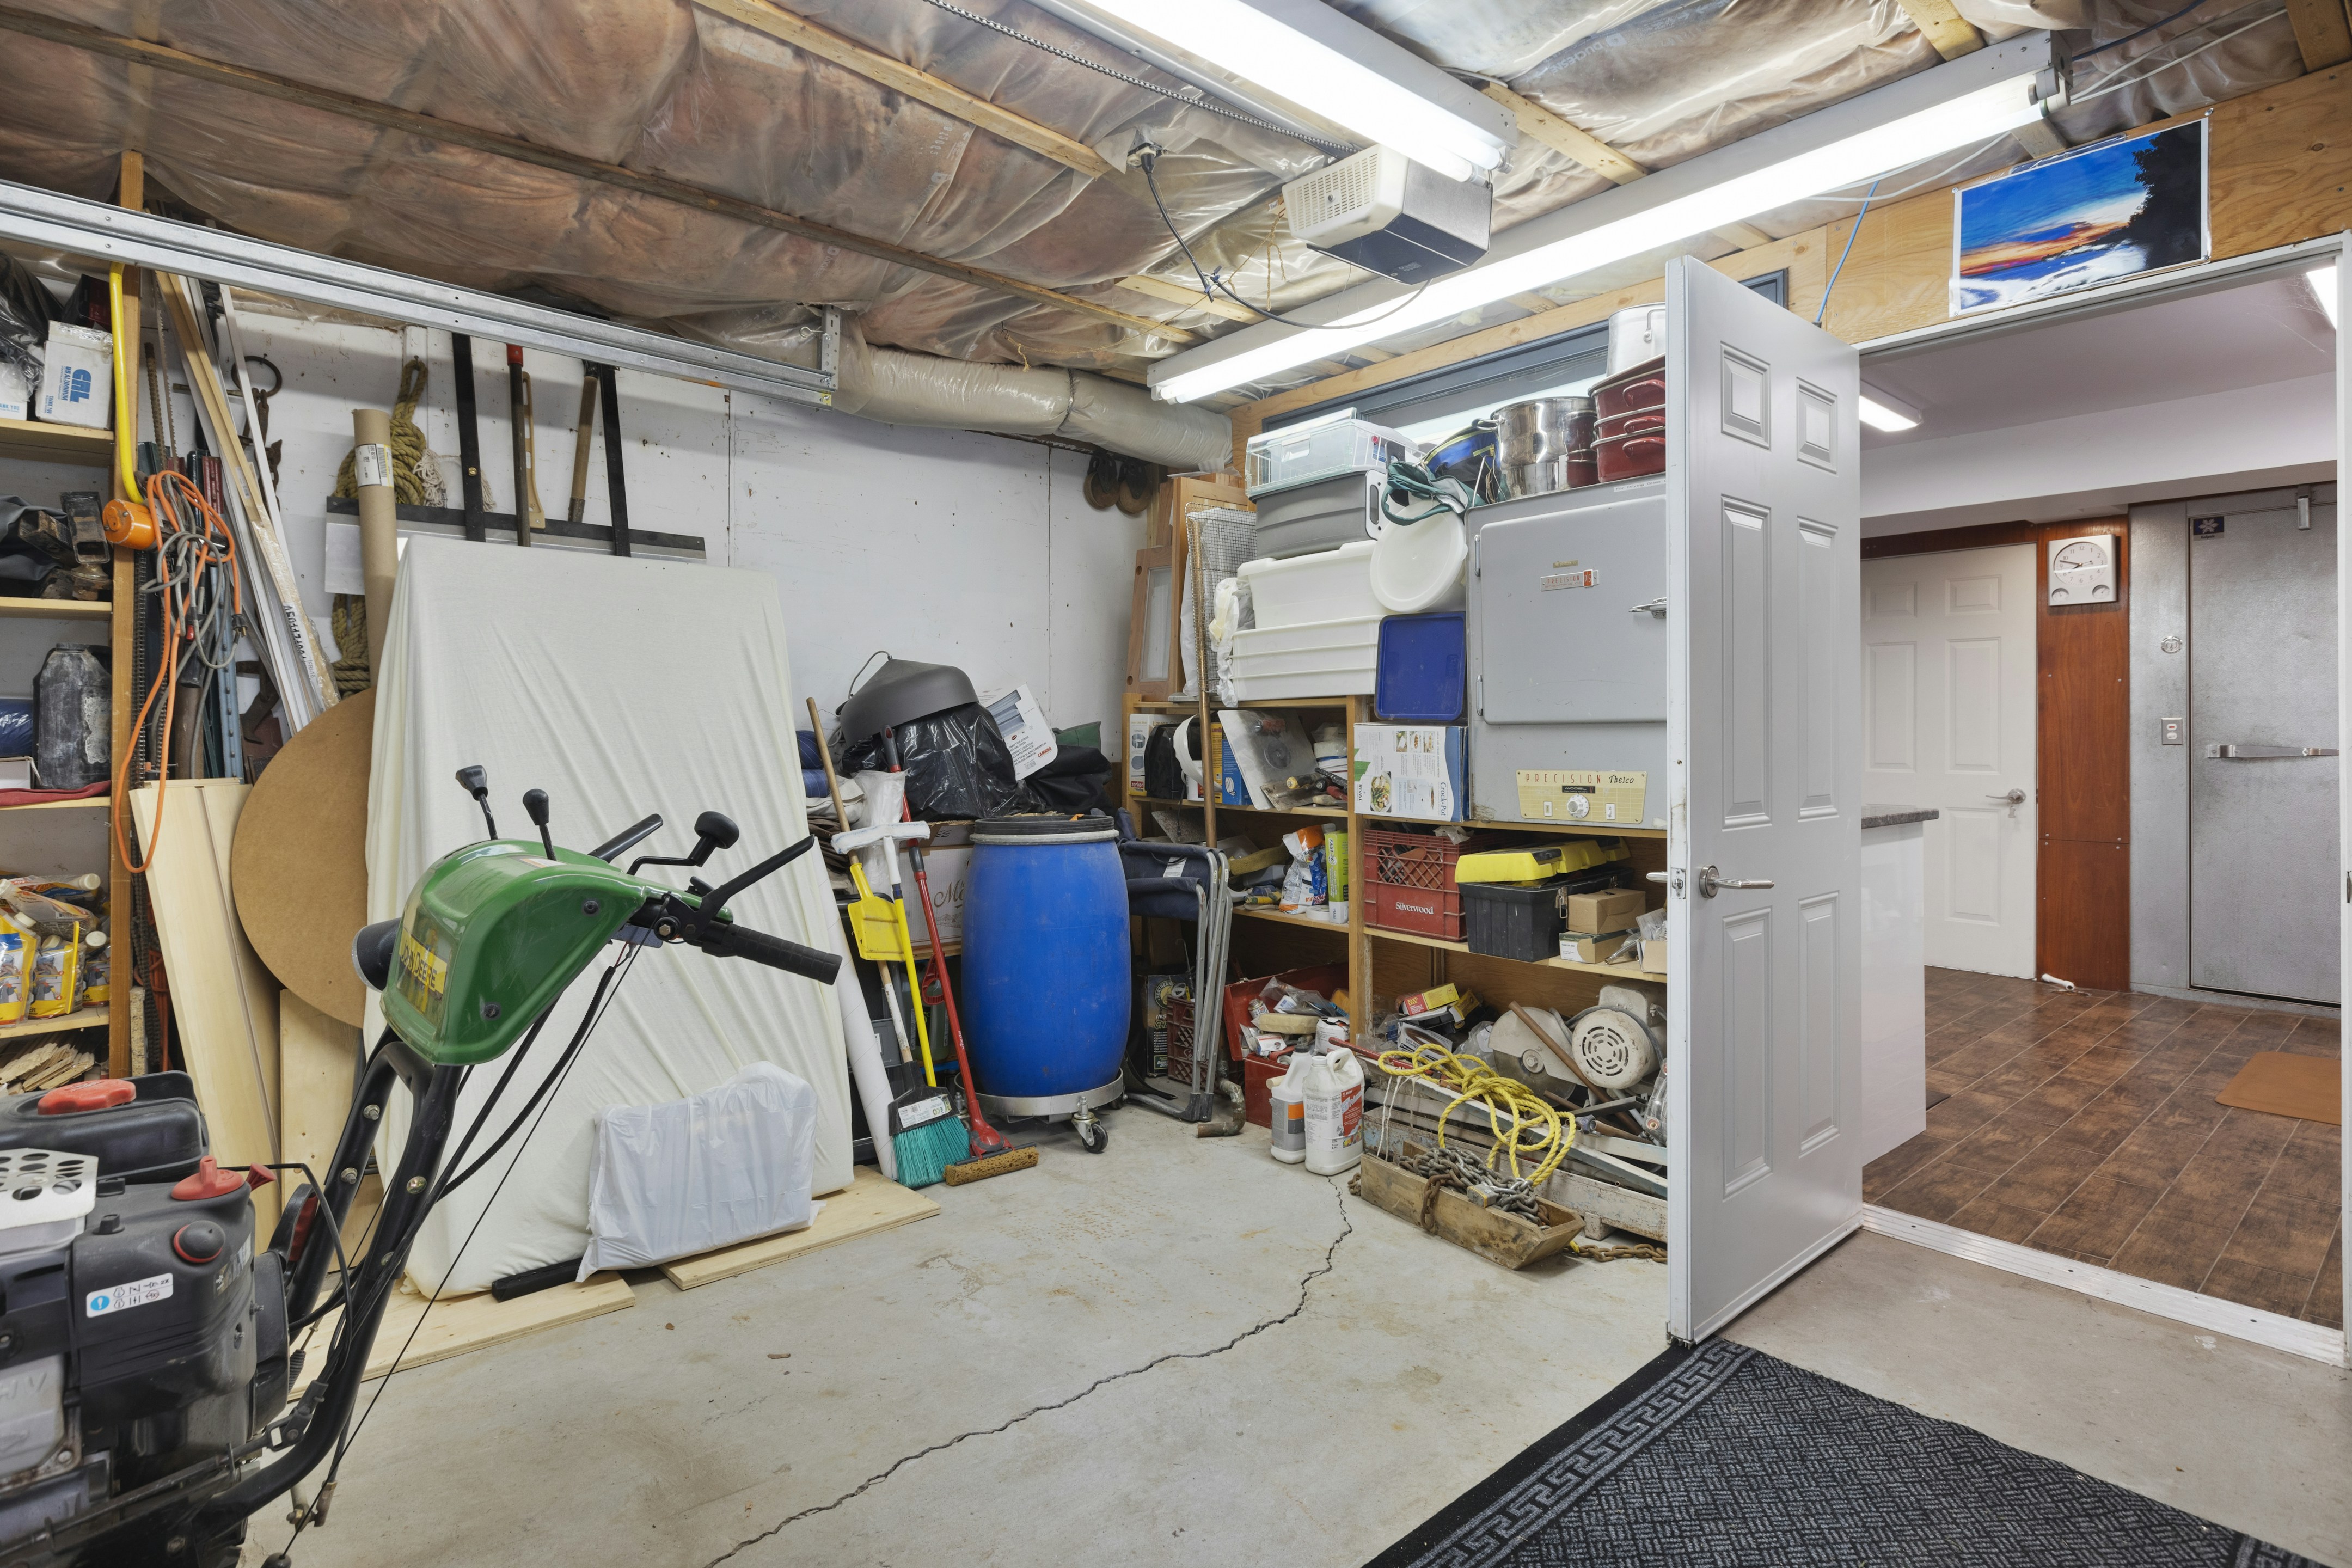 Garage Storage Solutions Tips: Organize Your Space for Efficiency and Functionality